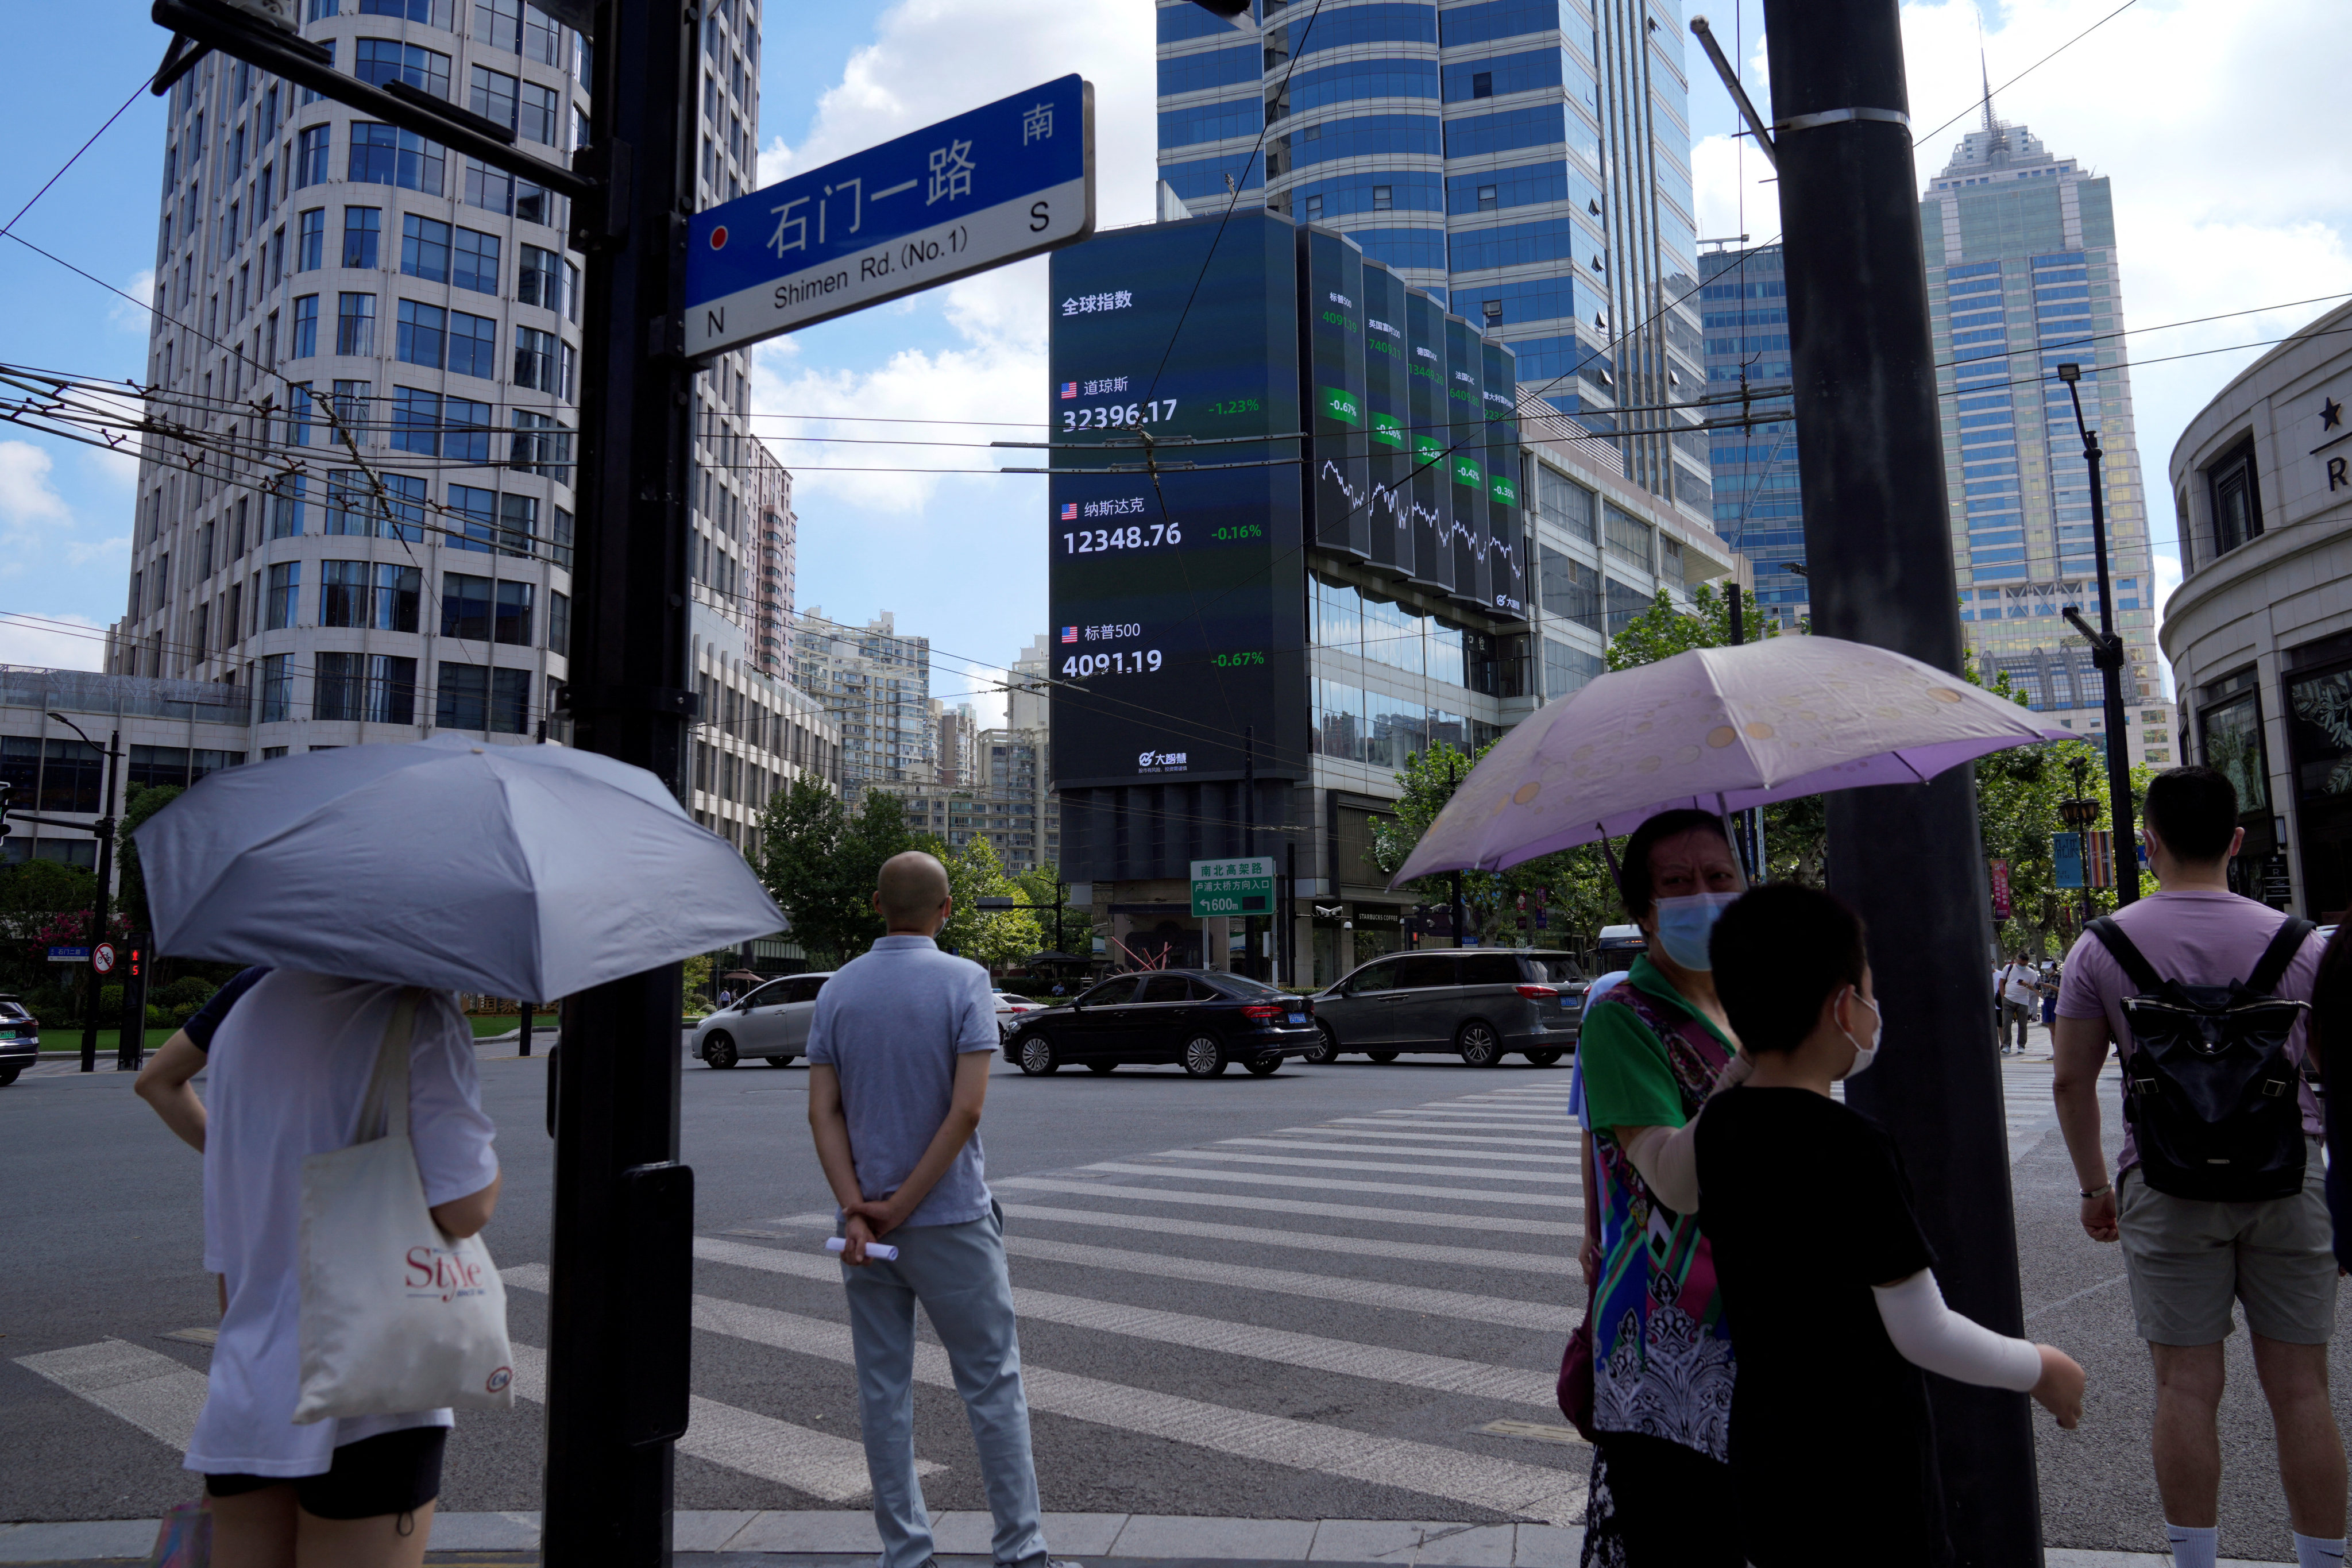 Pedestrians wait to cross a road at a junction near a giant display of stock indexes in Shanghai on August 3. Reuters